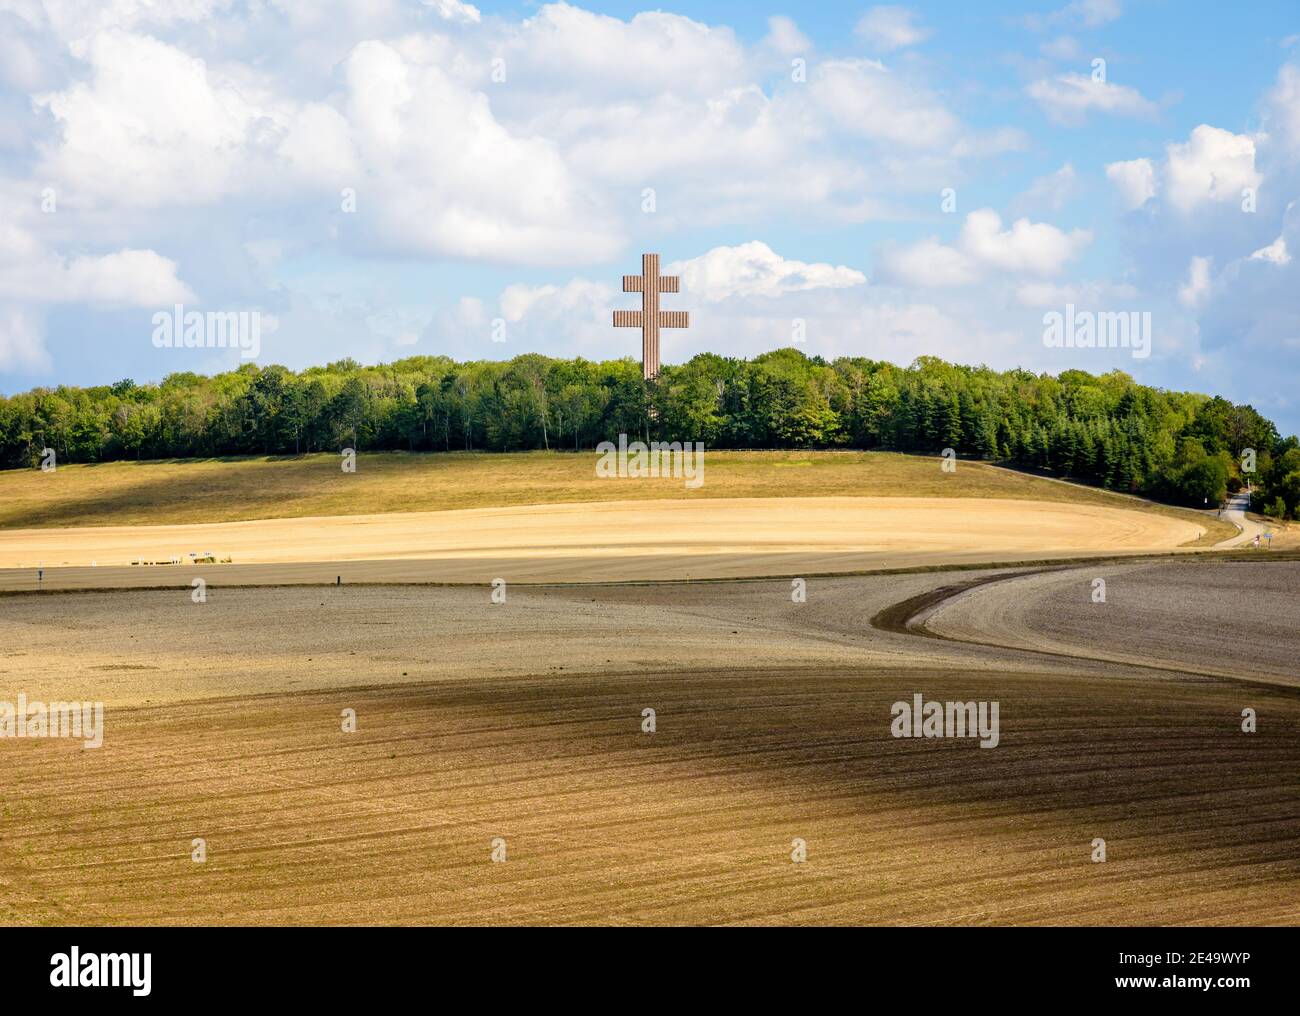 The large Cross of Lorraine of Charles de Gaulle Memorial dominates a rolling countryside landscape from the top of a hill. Stock Photo